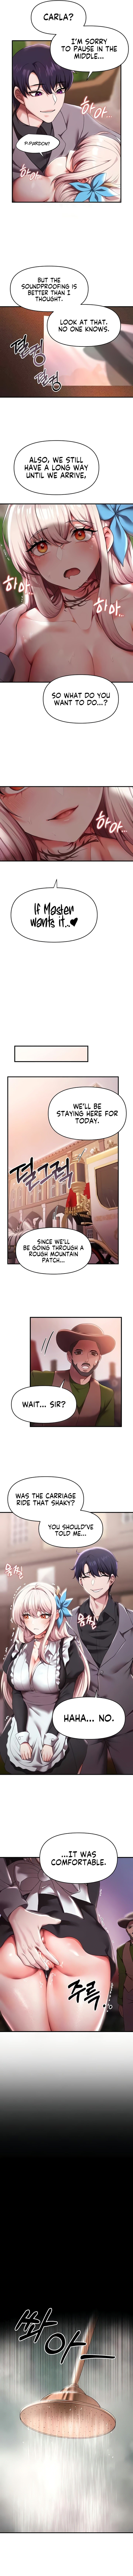 For Sale: Fallen Lady, Never Used Chapter 8 - Page 7